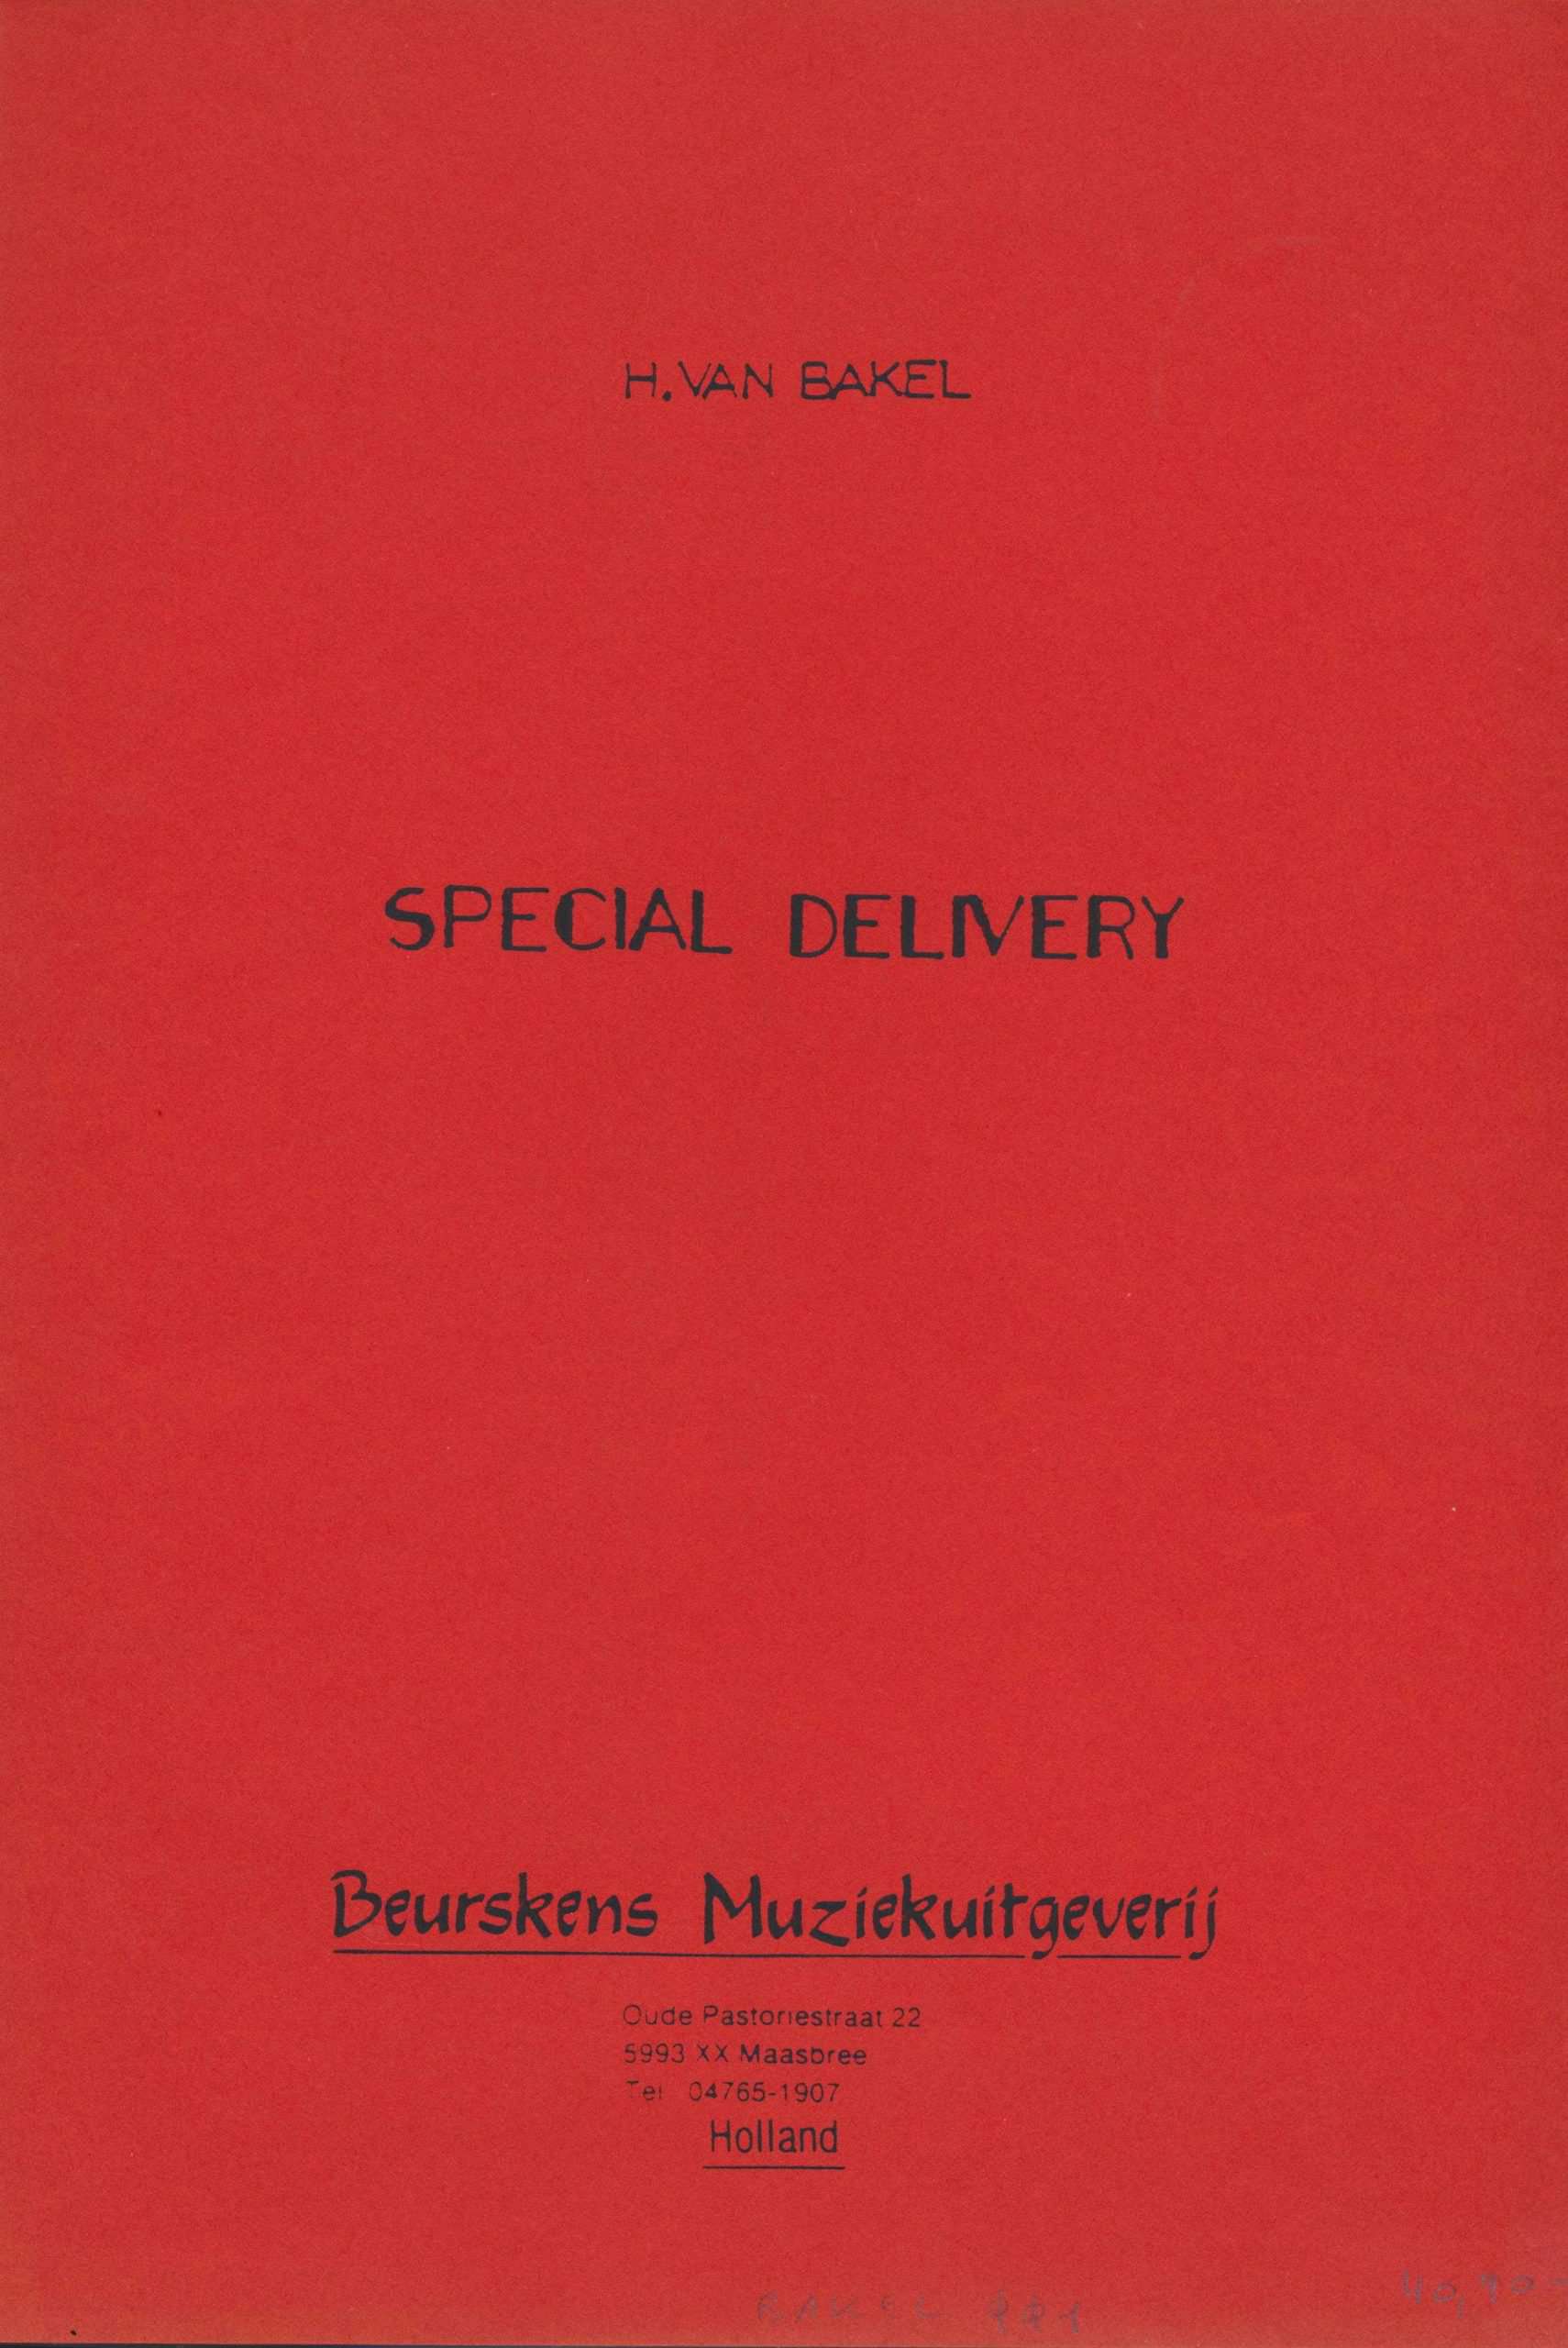 Special Delivery by H. Bakel